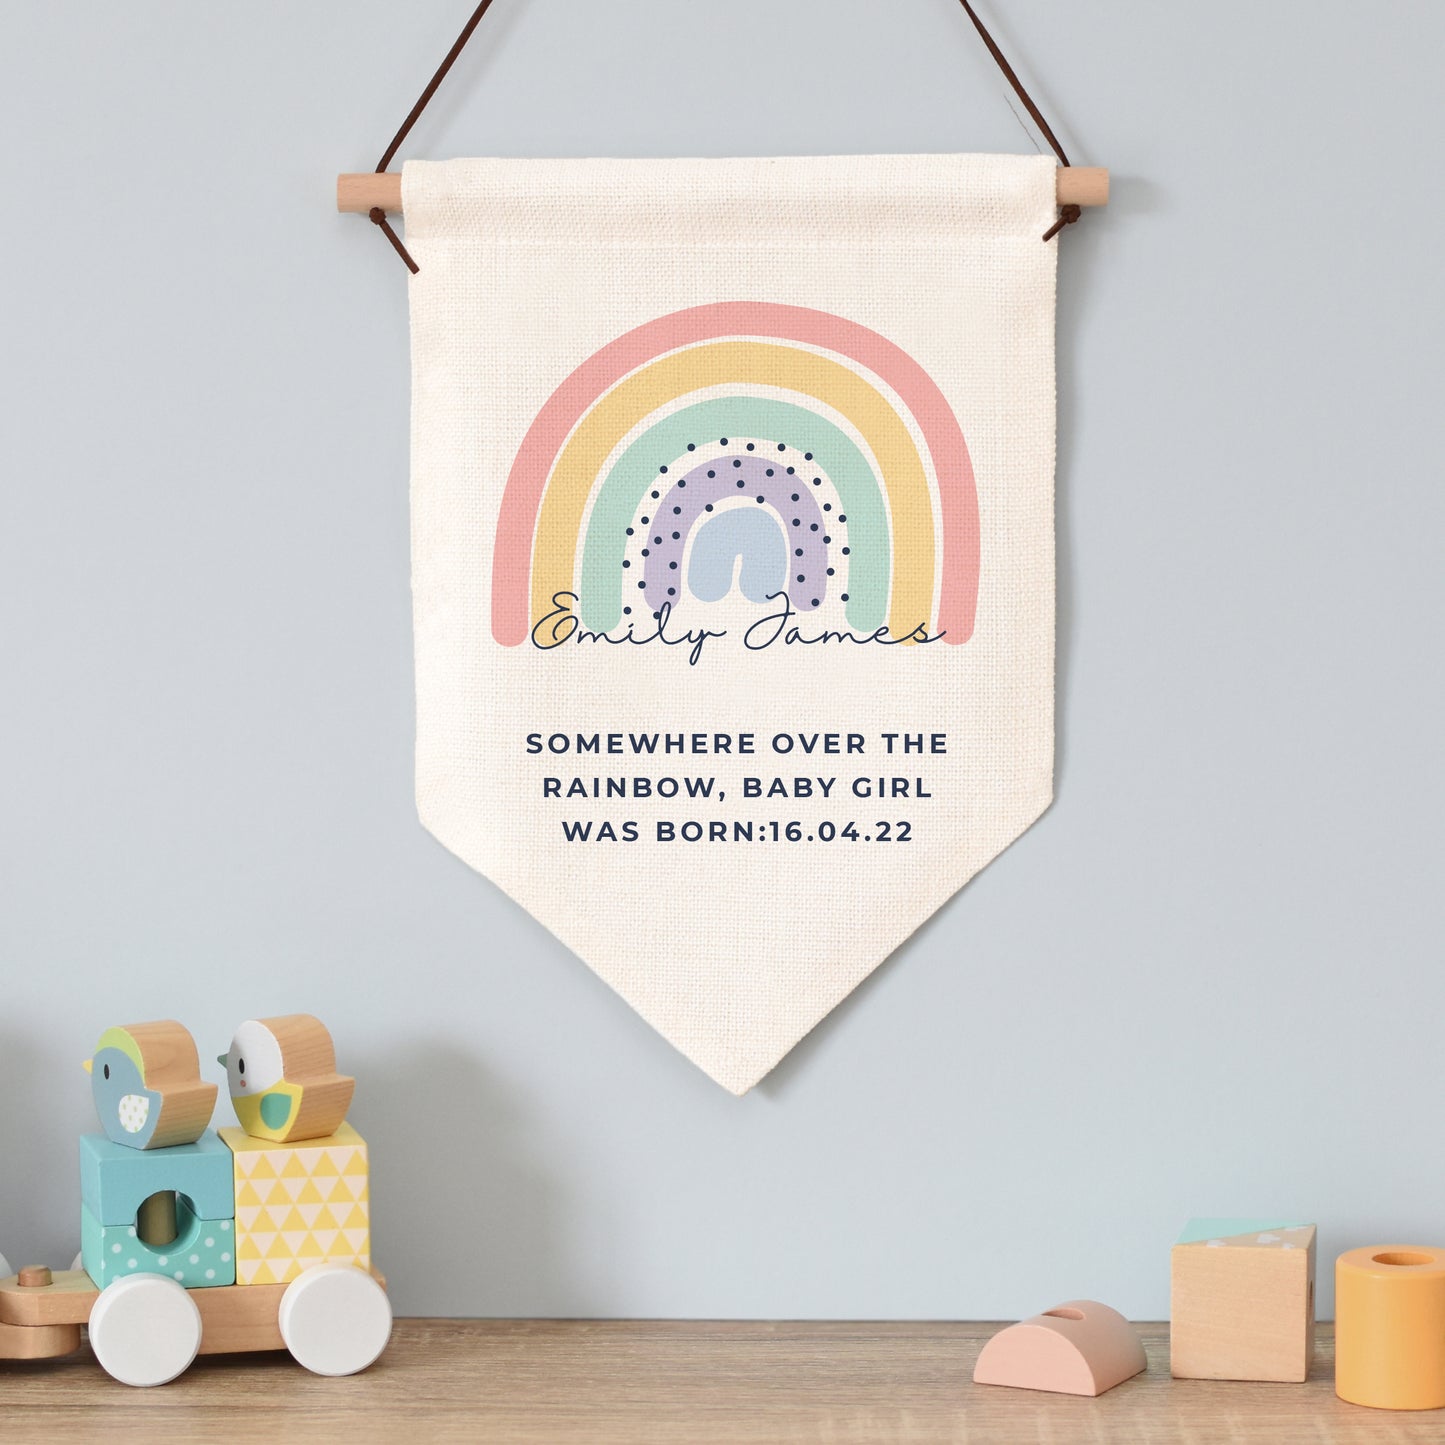 Personalised Rainbow Hanging Banner - Great for a Child's Bedroom